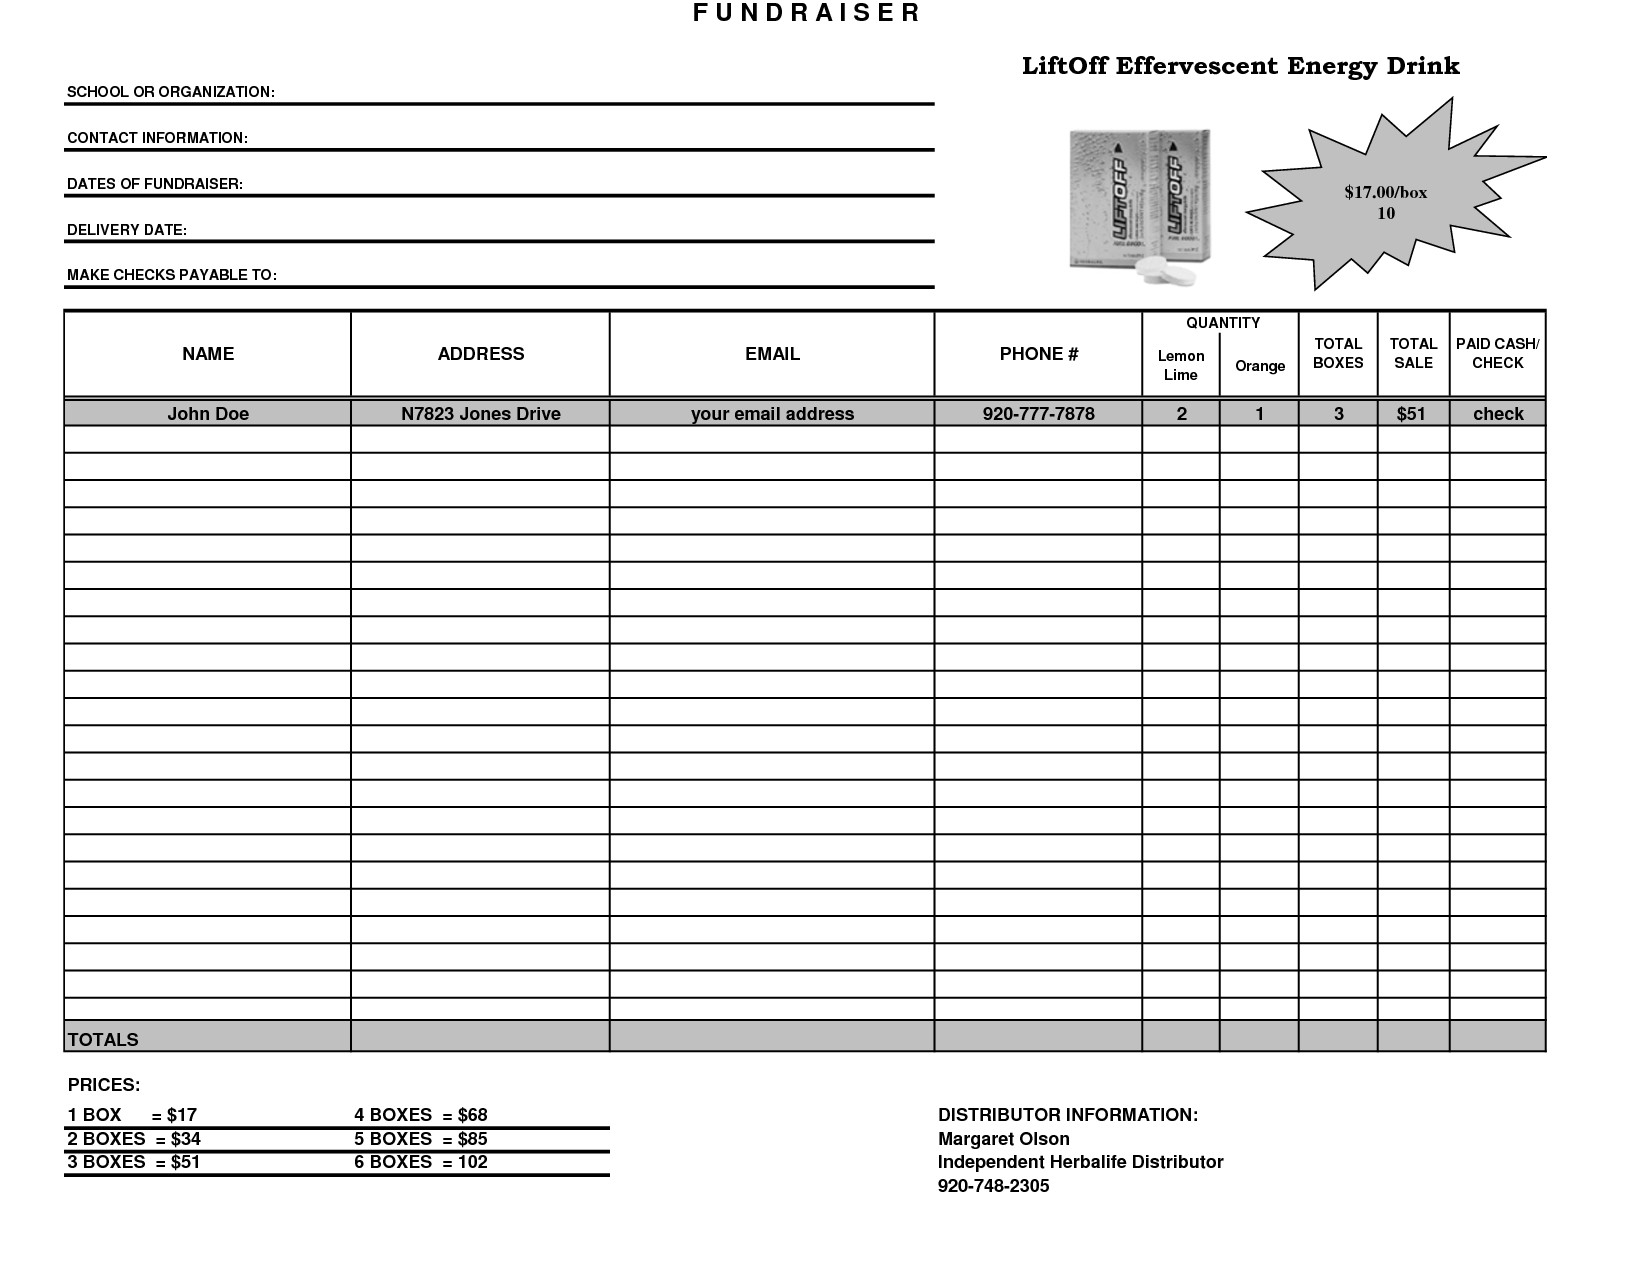 Fundraiser Template Excel Fundraiser Order Form Template